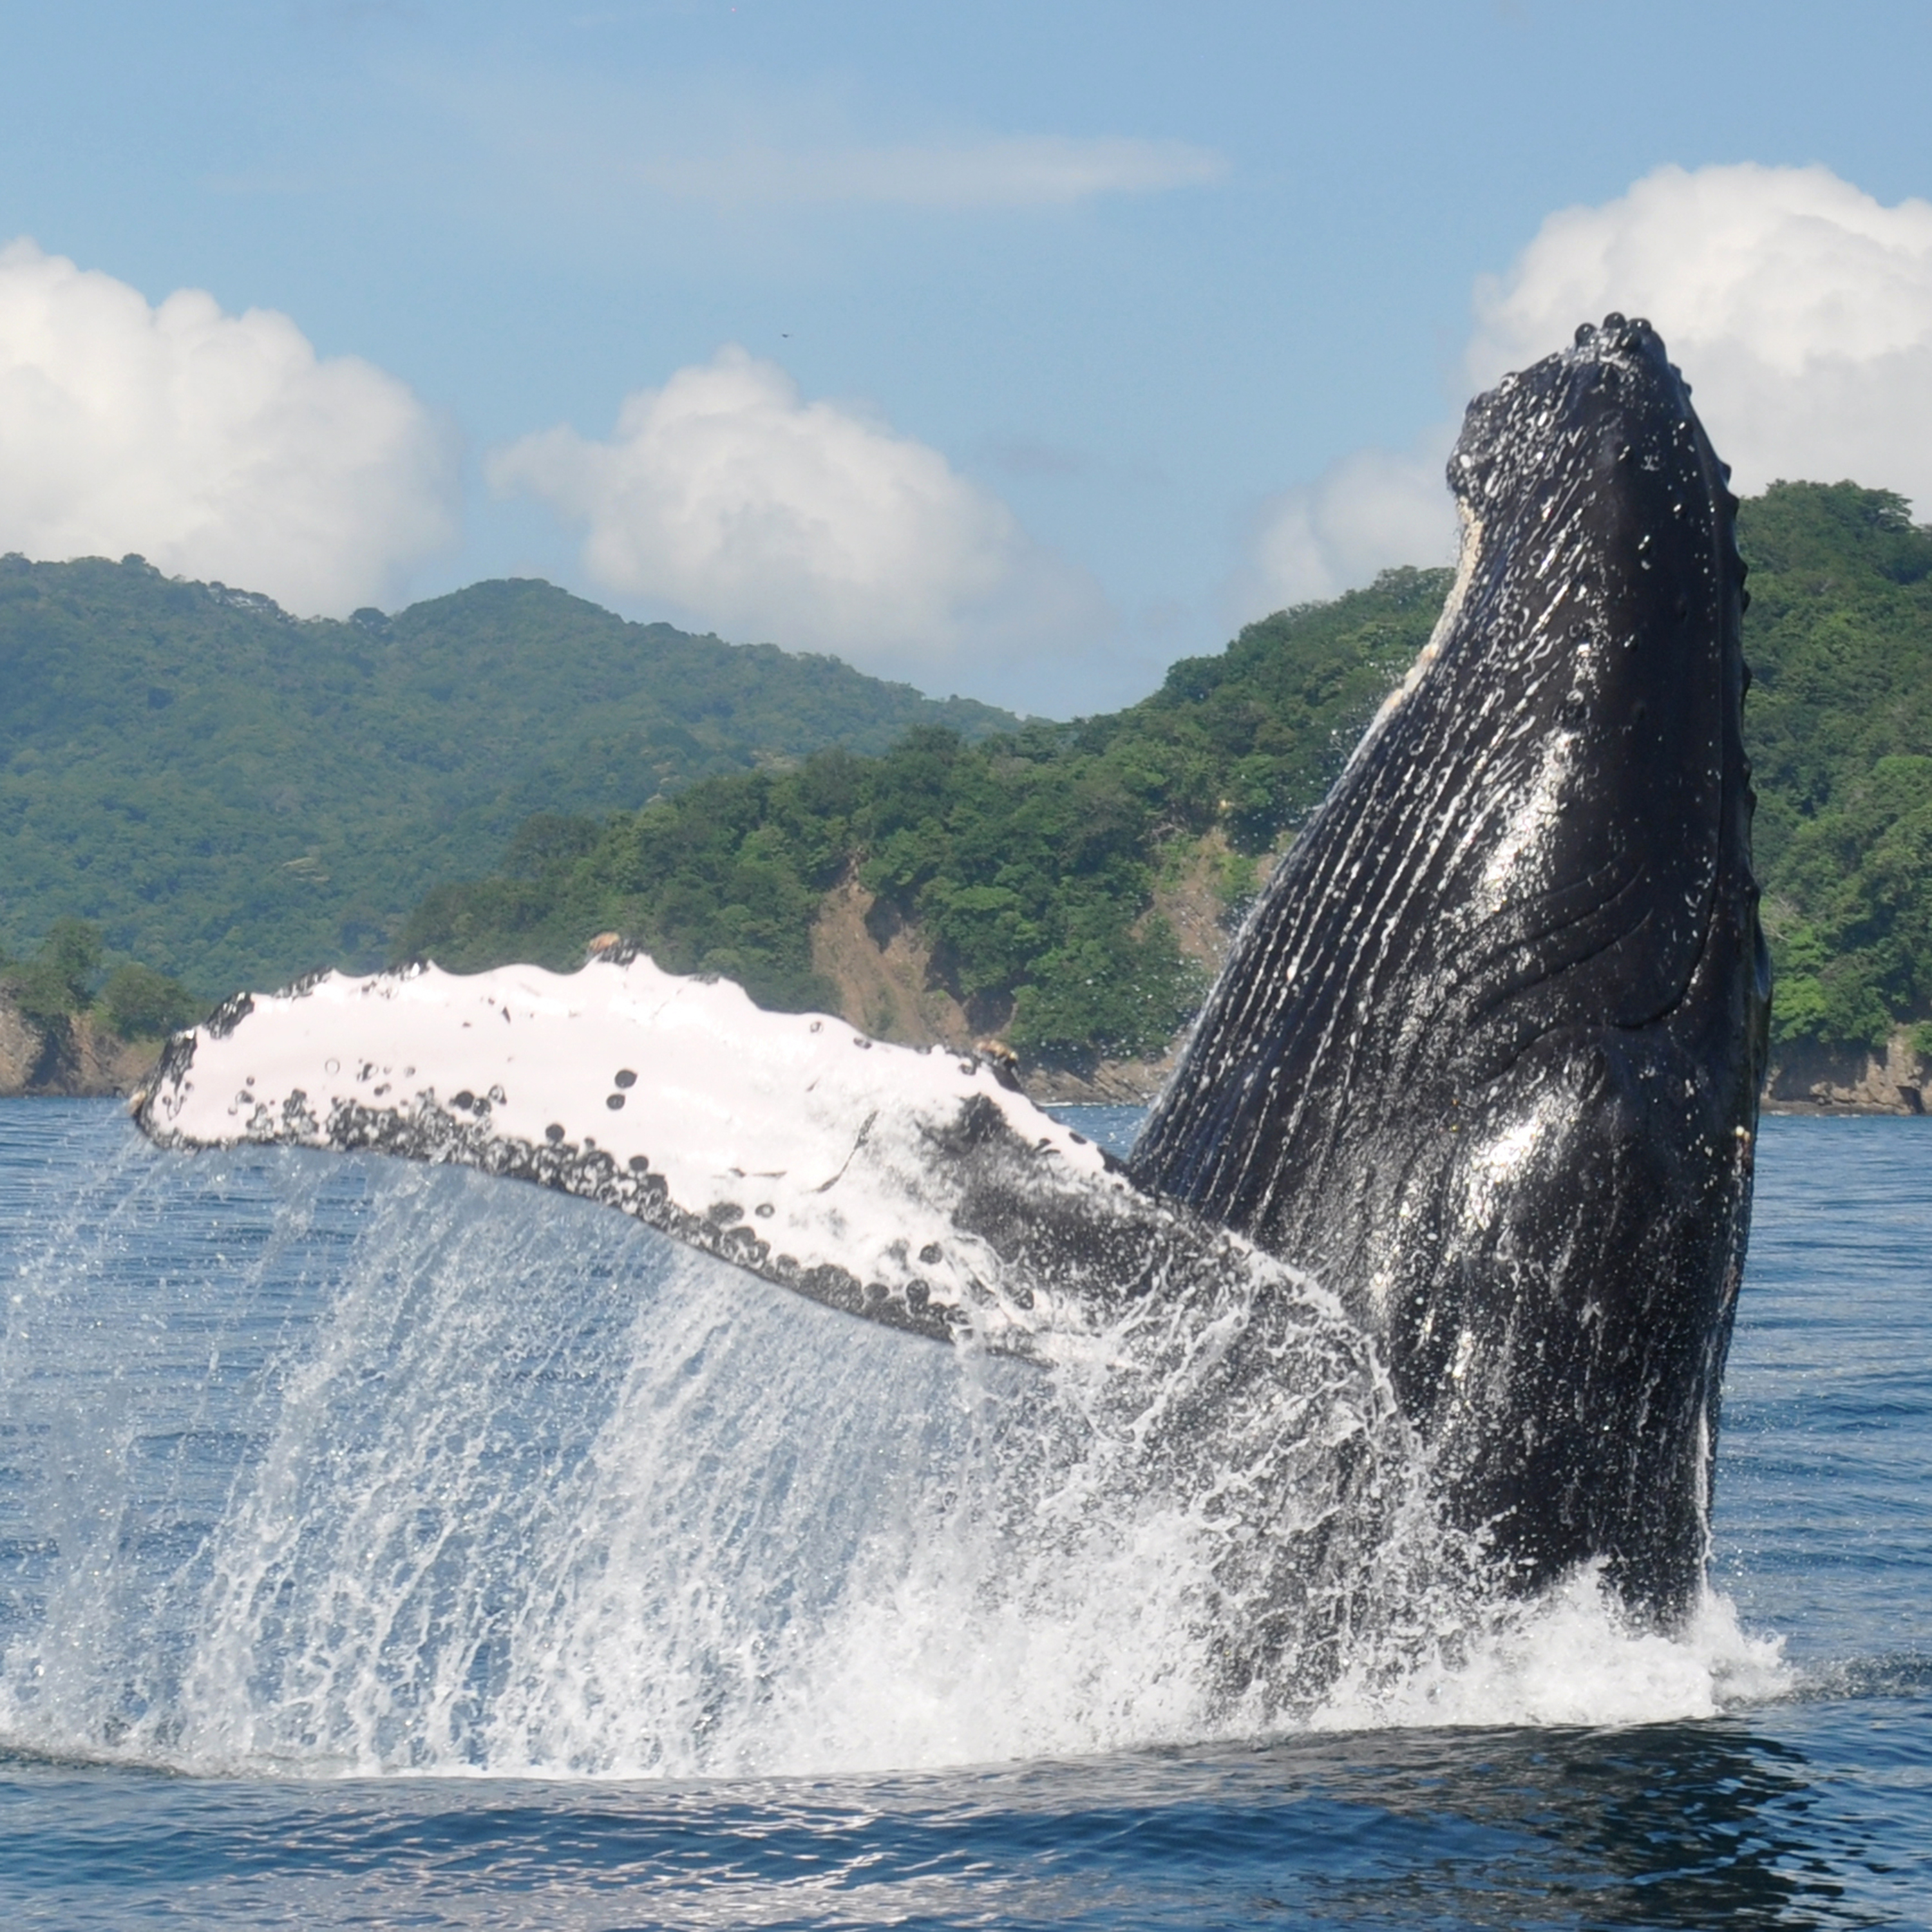 Years of Earthwatch research helped convince the Costa Rican government to restrict heavy maritime traffic in Golfo Dulce, calving ground for humpback whales. 